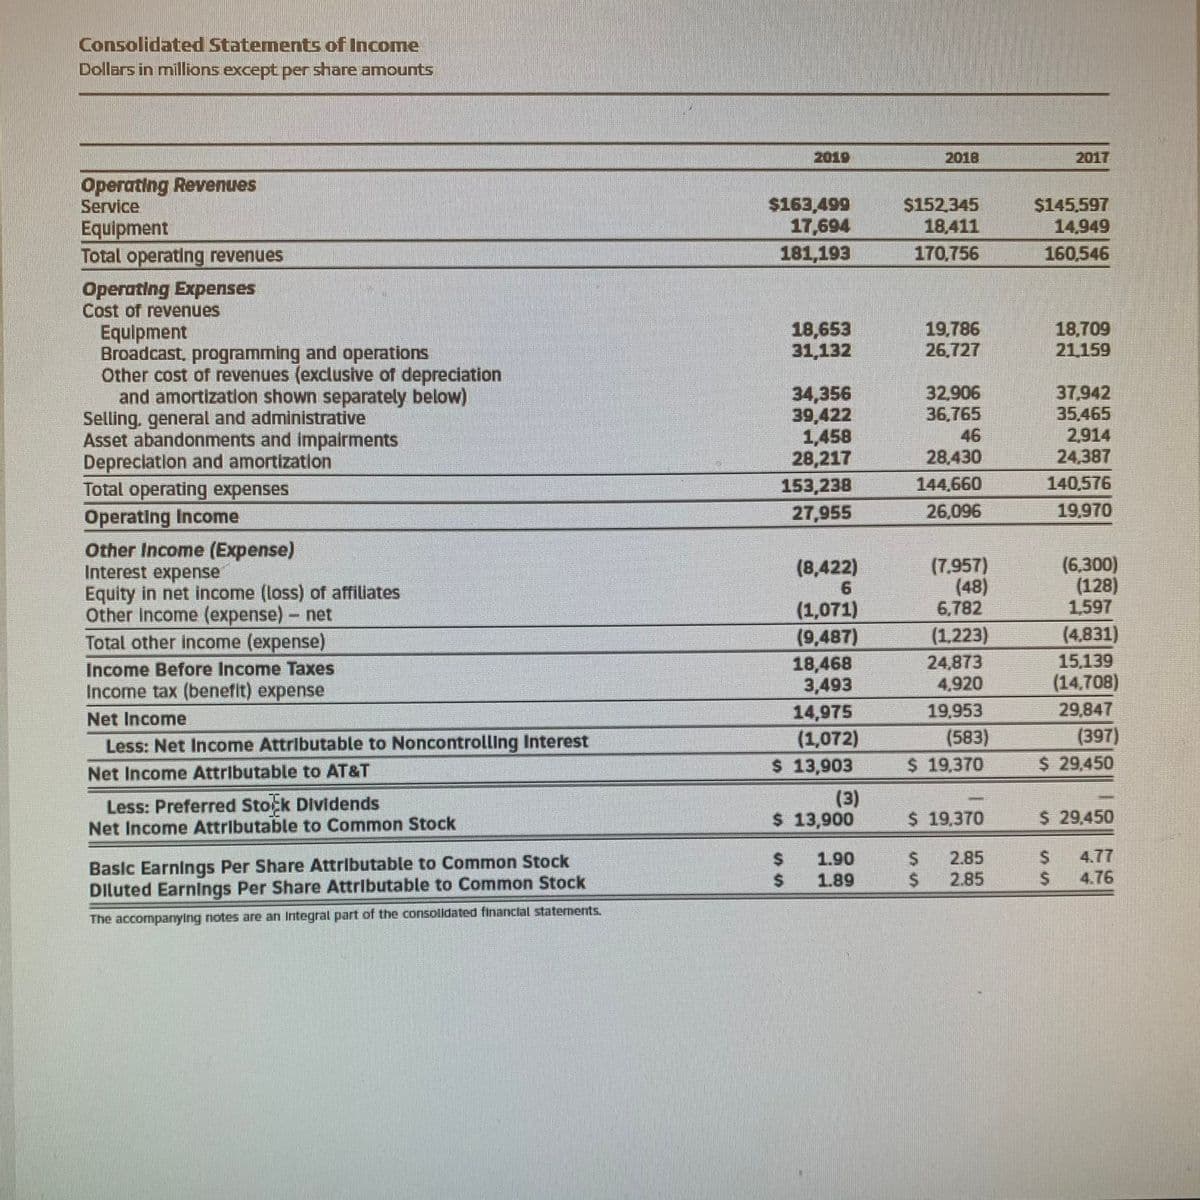 Consolidated Statements of Income
Dollars in millions except per share amounts
2019
2018
2017
Operating Revenues
Service
$163,499
17,694
$152.345
18,411
$145,597
14,949
Equipment
Total operating revenues
181,193
170,756
160,546
Operating Expenses
Cost of revenues
18,653
31,132
19,786
26.727
18.709
21.159
Equipment
Broadcast, programming and operations
Other cost of revenues (exclusive of depreciation
and amortization shown separately below)
Selling, general and administrative
Asset abandonments and impairments
Depreciation and amortization
Total operating expenses
Operating Income
Other Income (Expense)
Interest expense
Equity in net income (loss) of affiliates
Other Income (expense)- net
Total other income (expense)
34,356
39,422
1,458
28,217
32,906
36,765
46
37,942
35,465
2,914
24,387
28,430
153,238
144,660
140,576
27,955
26,096
19,970
(6,300)
(128)
1,597
(4,831)
15,139
(14,708)
(8,422)
9.
(7,957)
(48)
6,782
(1,071)
(9,487)
18,468
3,493
14,975
(1,072)
$ 13,903
(1,223)
24,873
4,920
Income Before Income Taxes
Income tax (benefit) expense
19,953
29,847
Net Income
(583)
$ 19,370
(397)
$ 29,450
Less: Net Income Attributable to Noncontrolling Interest
Net Income Attributable to AT&T
Less: Preferred Stock Dividends
Net Income Attributable to Common Stock
(3)
$ 13,900
$ 19,370
$ 29,450
4.77
Baslc Earnings Per Share Attributable to Common Stock
DIluted EarnIngs Per Share Attributable to Common Stock
1.90
1.89
2.85
2.85
2$
24
4.76
The accompanying notes are an Integral part of the consolldated financlal statements.
